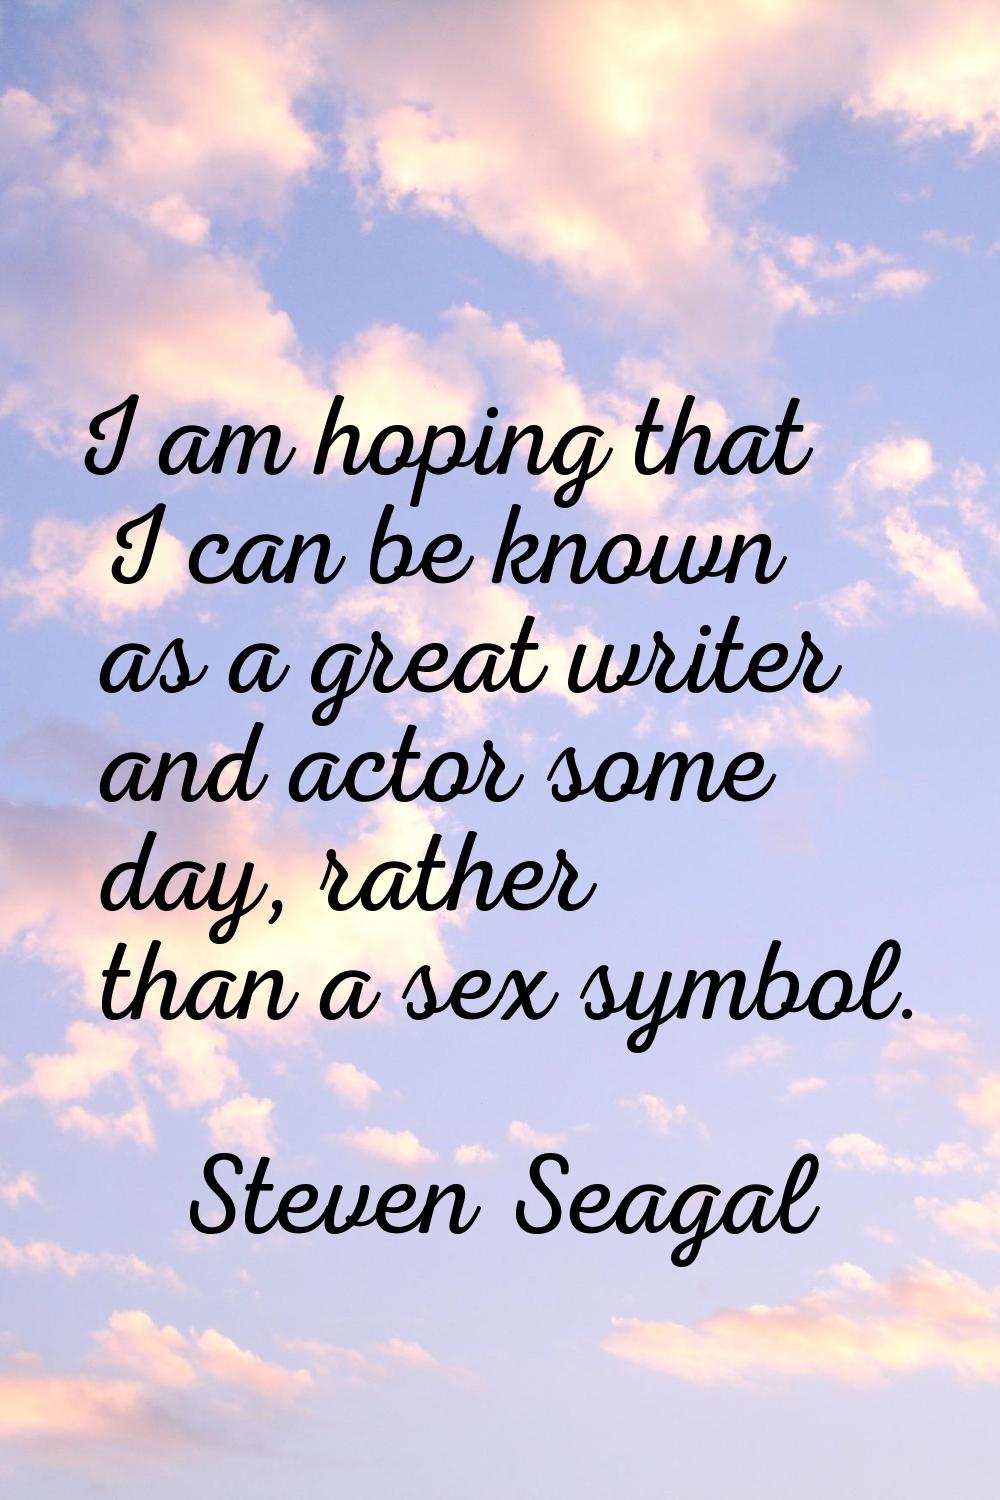 I am hoping that I can be known as a great writer and actor some day, rather than a sex symbol.